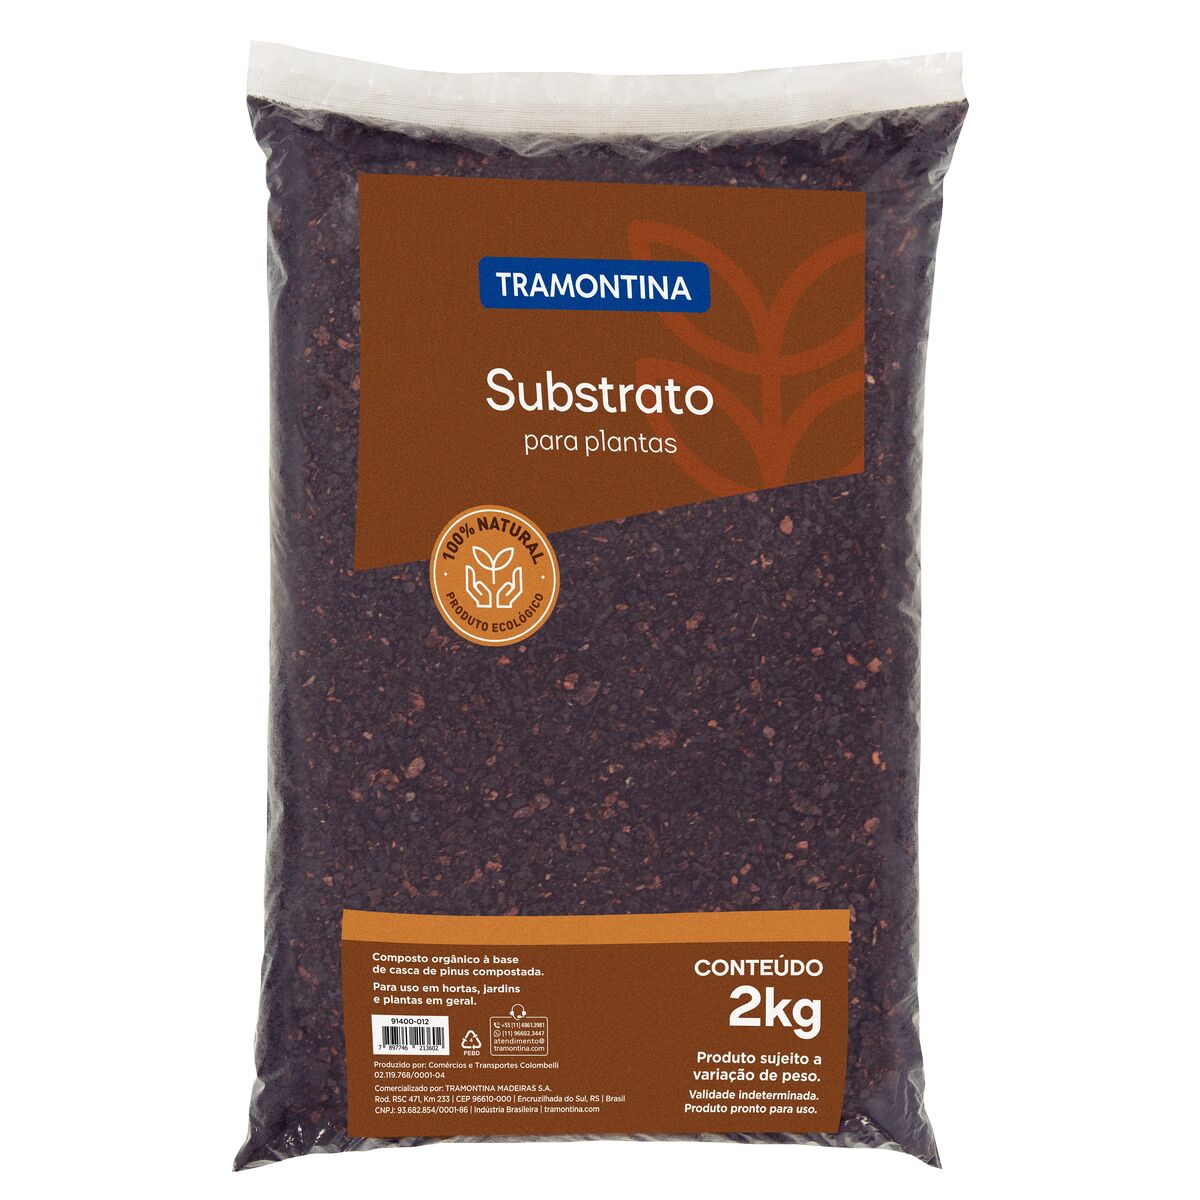 Tramontina 2 kg Plant Substrate